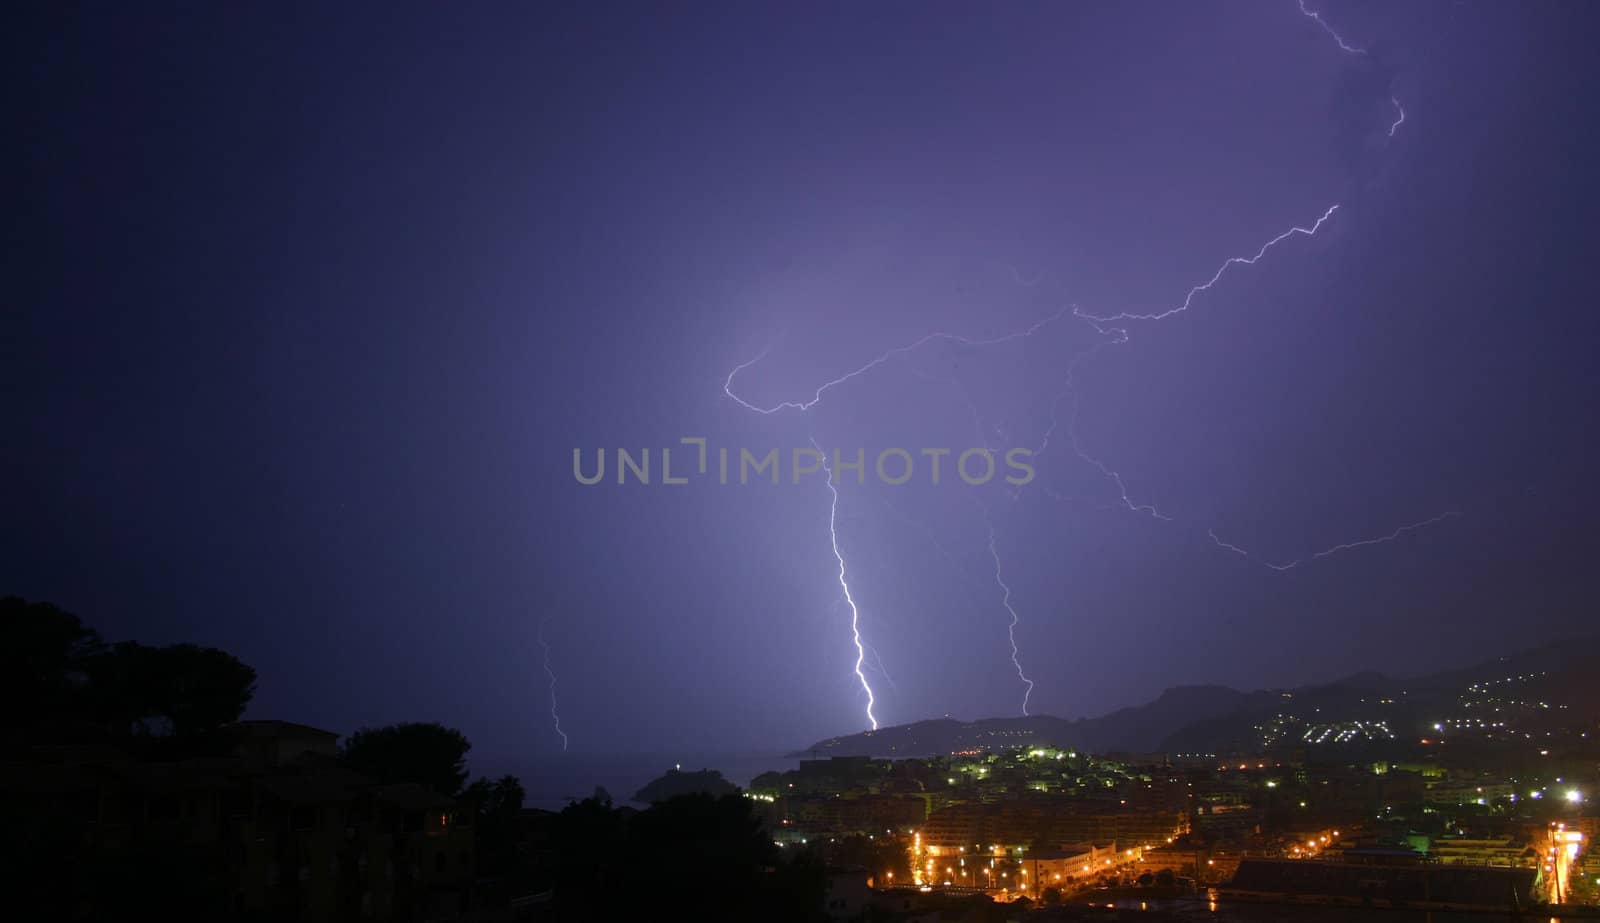 3 lightning photos shot from the same viewpoint.  Same landscape, choice of bolts.  The image is taken from a high viewpoint, overlooking trees, a town and mountains.  This is my favourite of the 3 because of the almost 'batman'-like lighting and colour